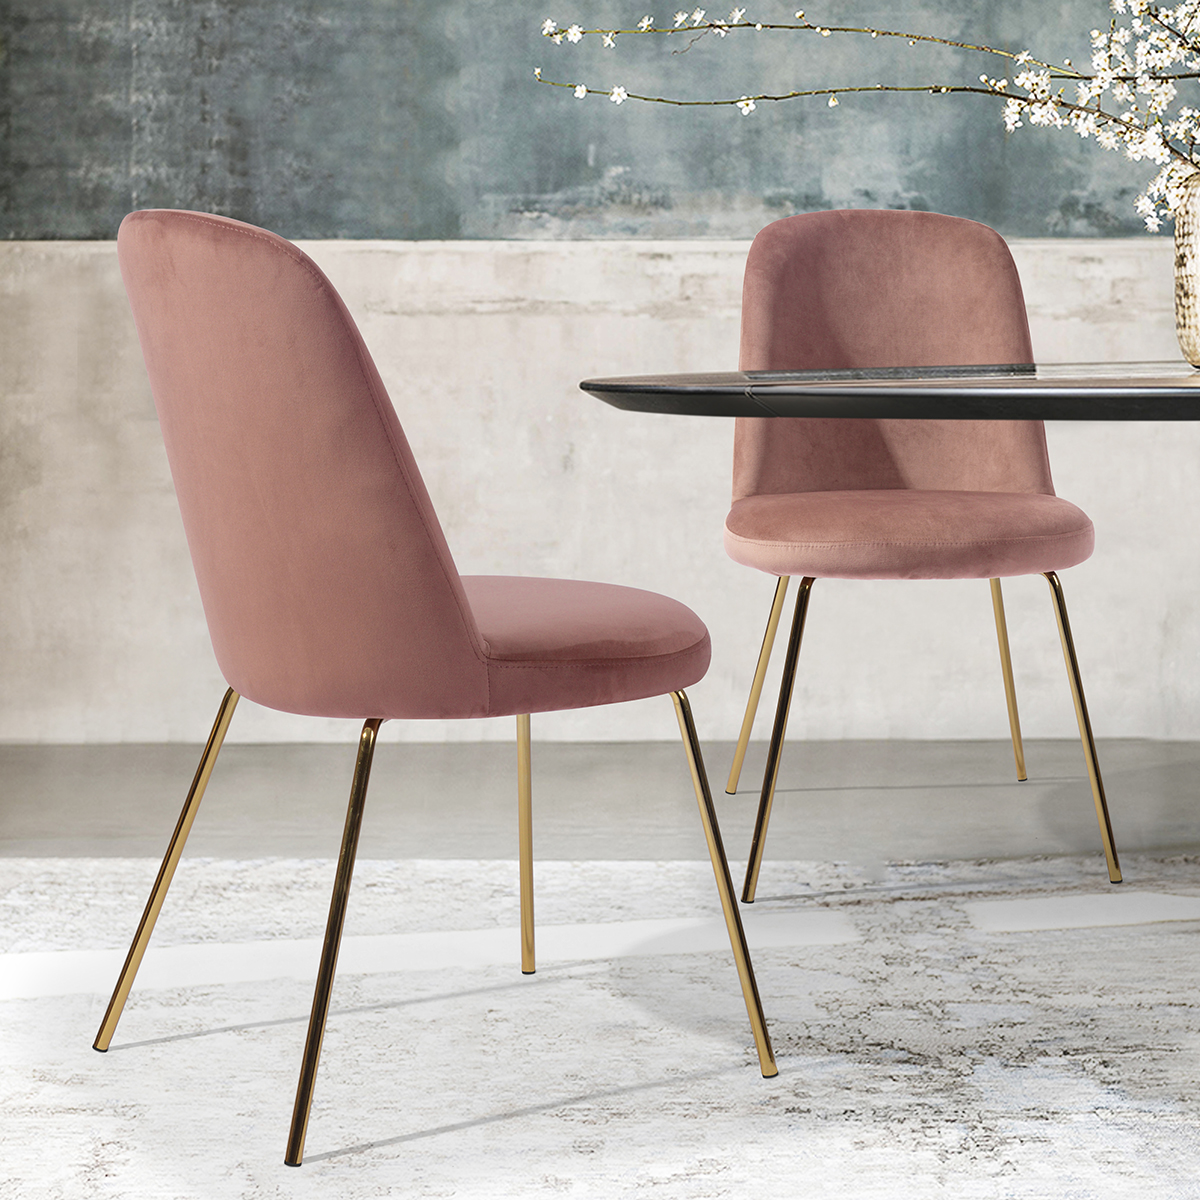 Modern Upholstered Dining Chair Set of 2 with Gold Legs - rose